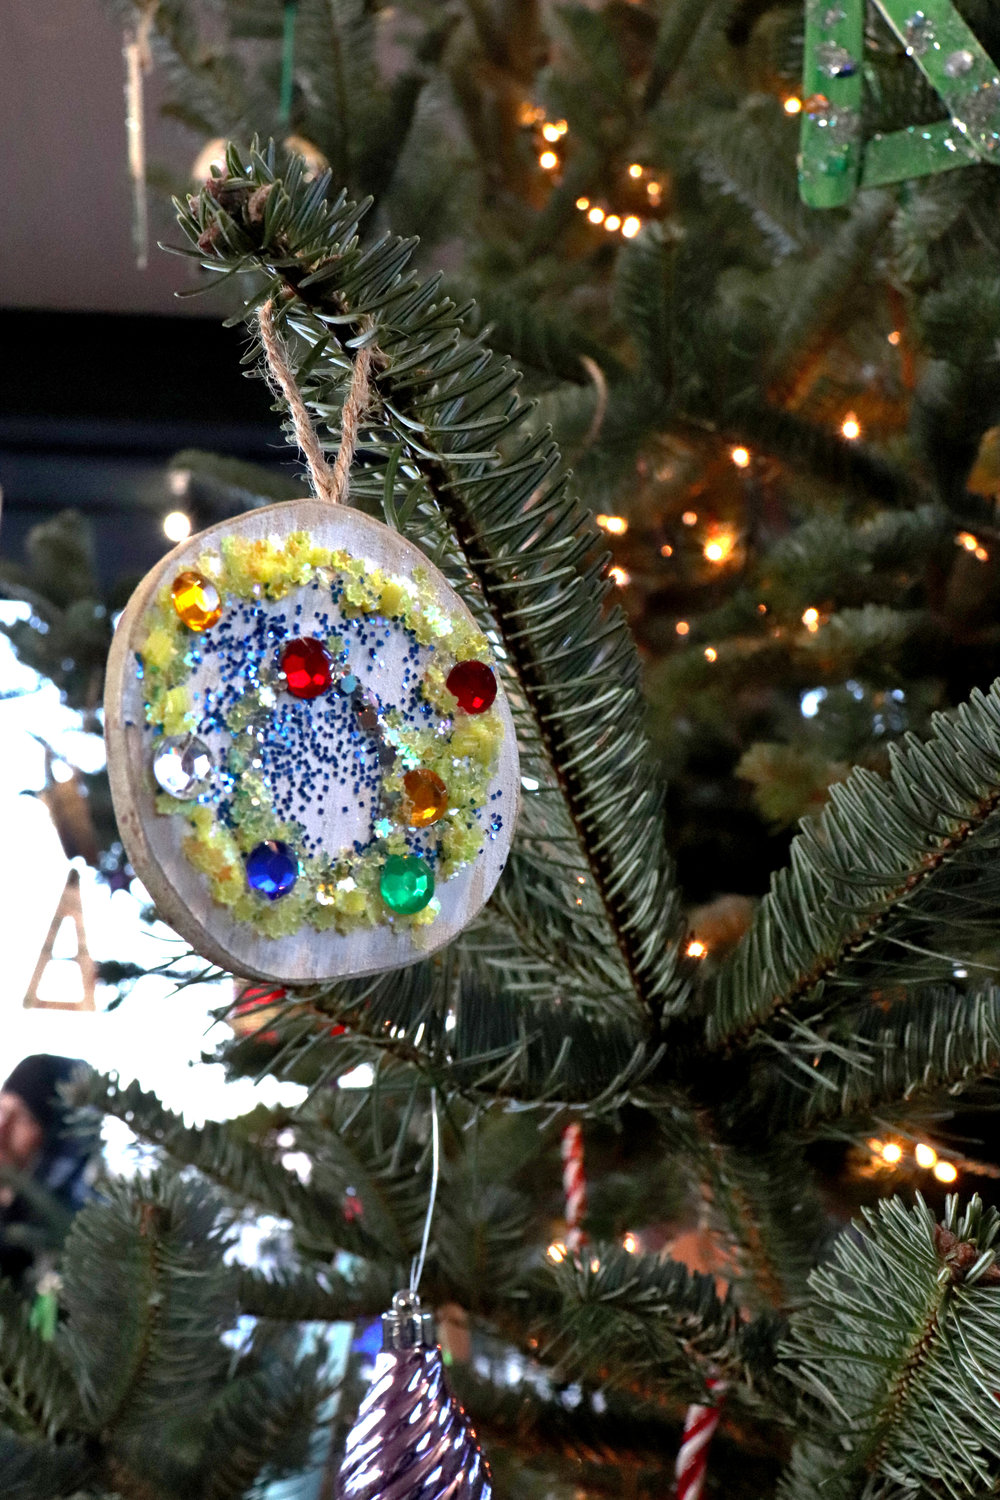 Handmade ornaments donated by the Summit Center for Child Development hang from the City of Chehalis’ Christmas tree outside the Lewis County Historical Museum.